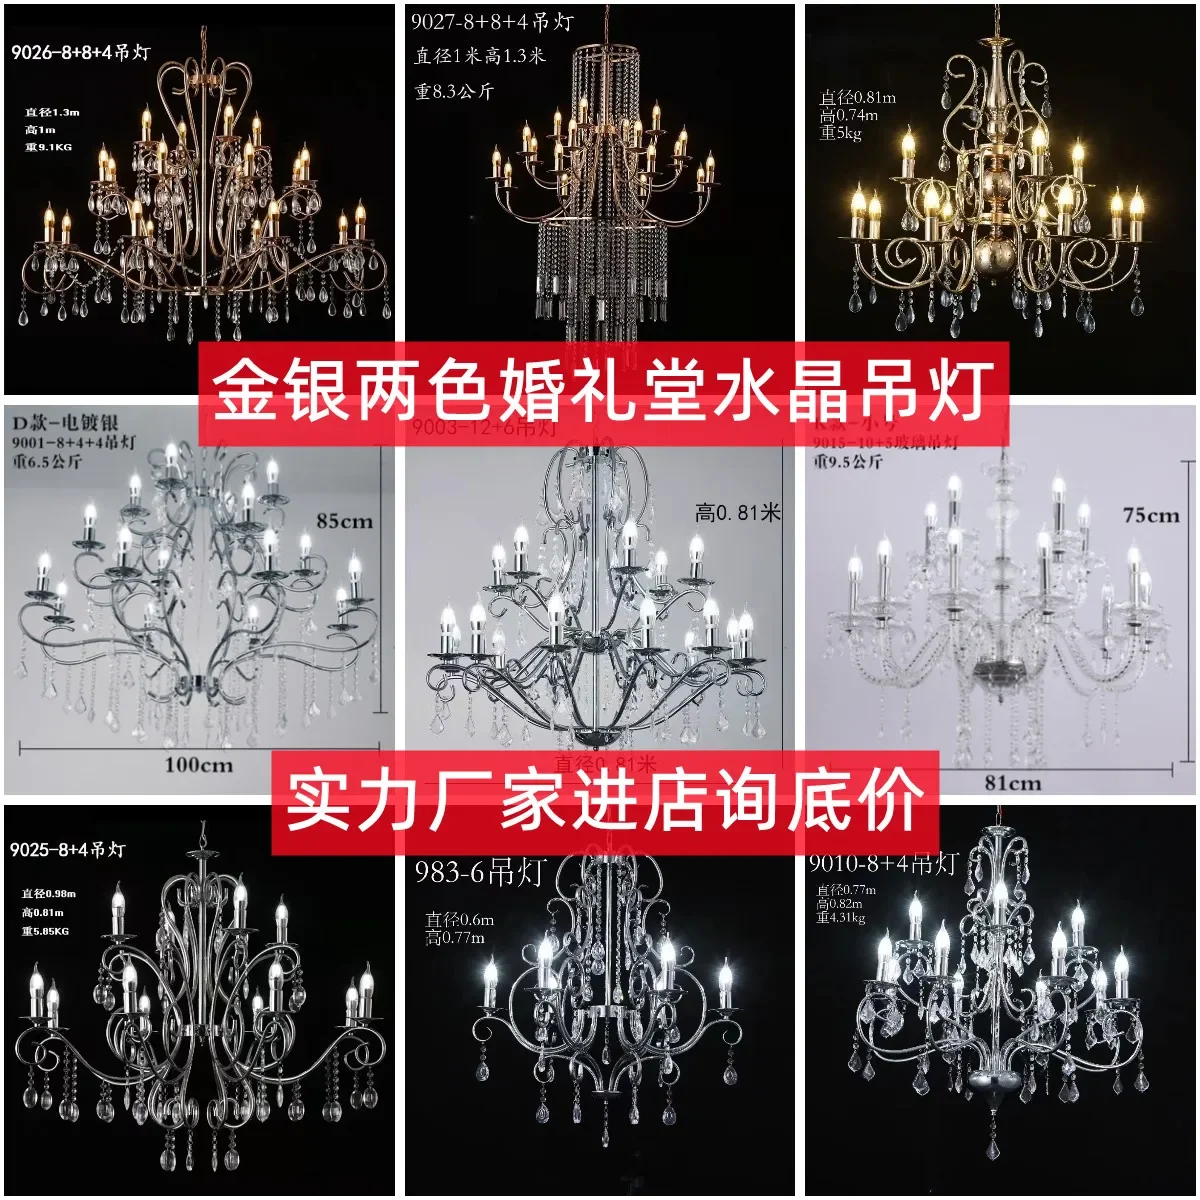 

Wedding Hall European-Style Iron Electroplating Crystal Chandelier Ceremony Pavilion Ceiling Lighting Wedding Props Crystal